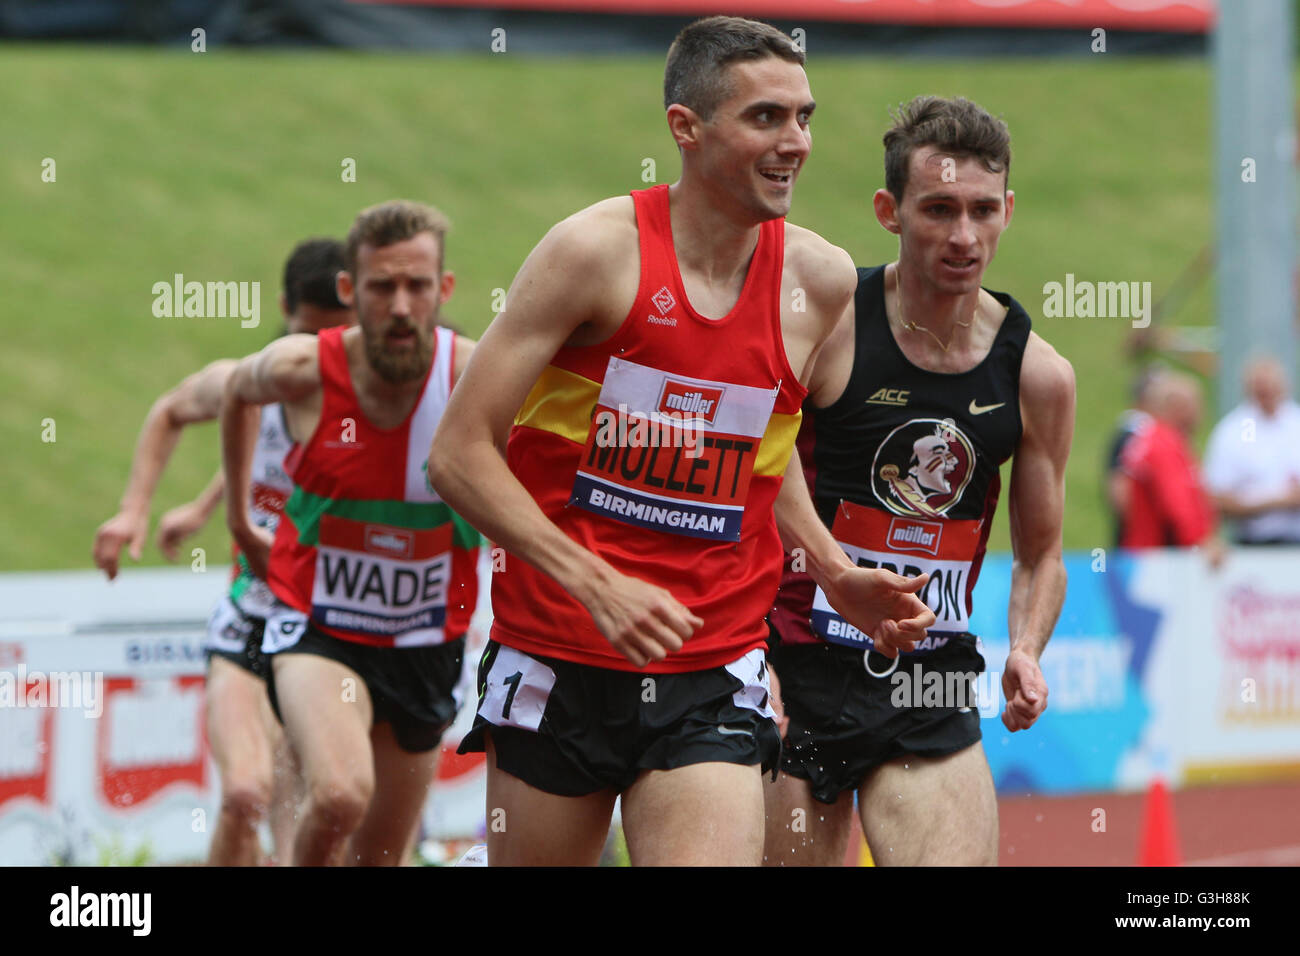 Birmingham, UK. 25th June, 2016. Rob Mullett takes first place in the mens 3000m Steeplechase Credit Dan Cooke/ Alamy Live News Stock Photo